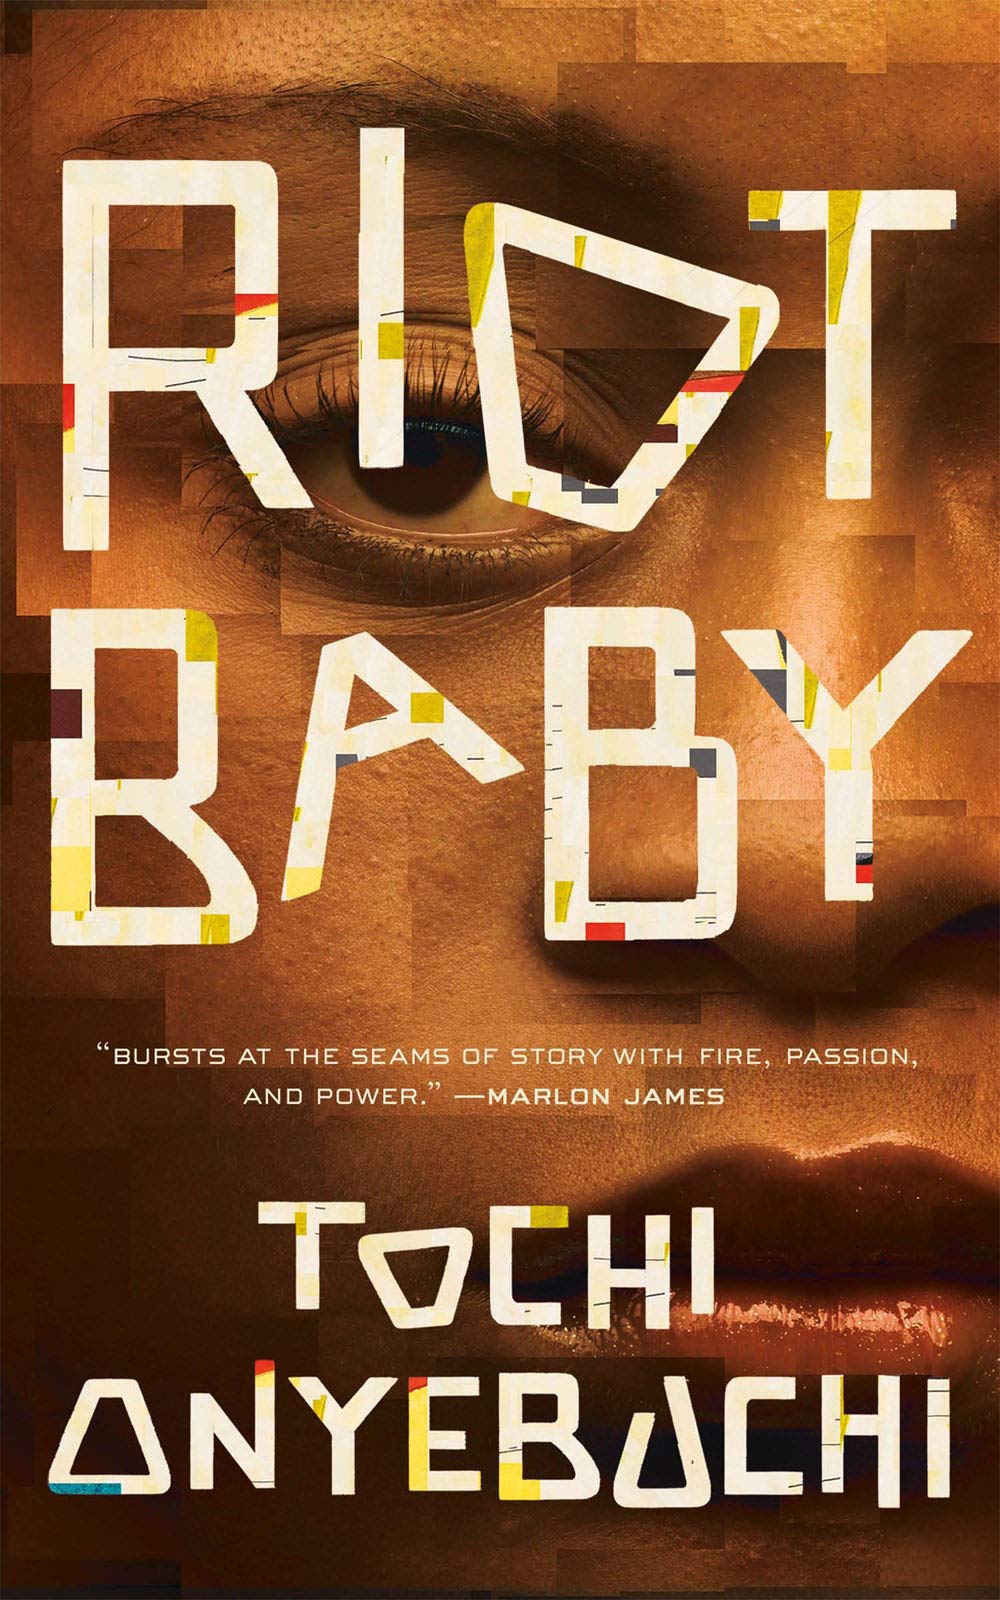 Image for "Riot Baby"